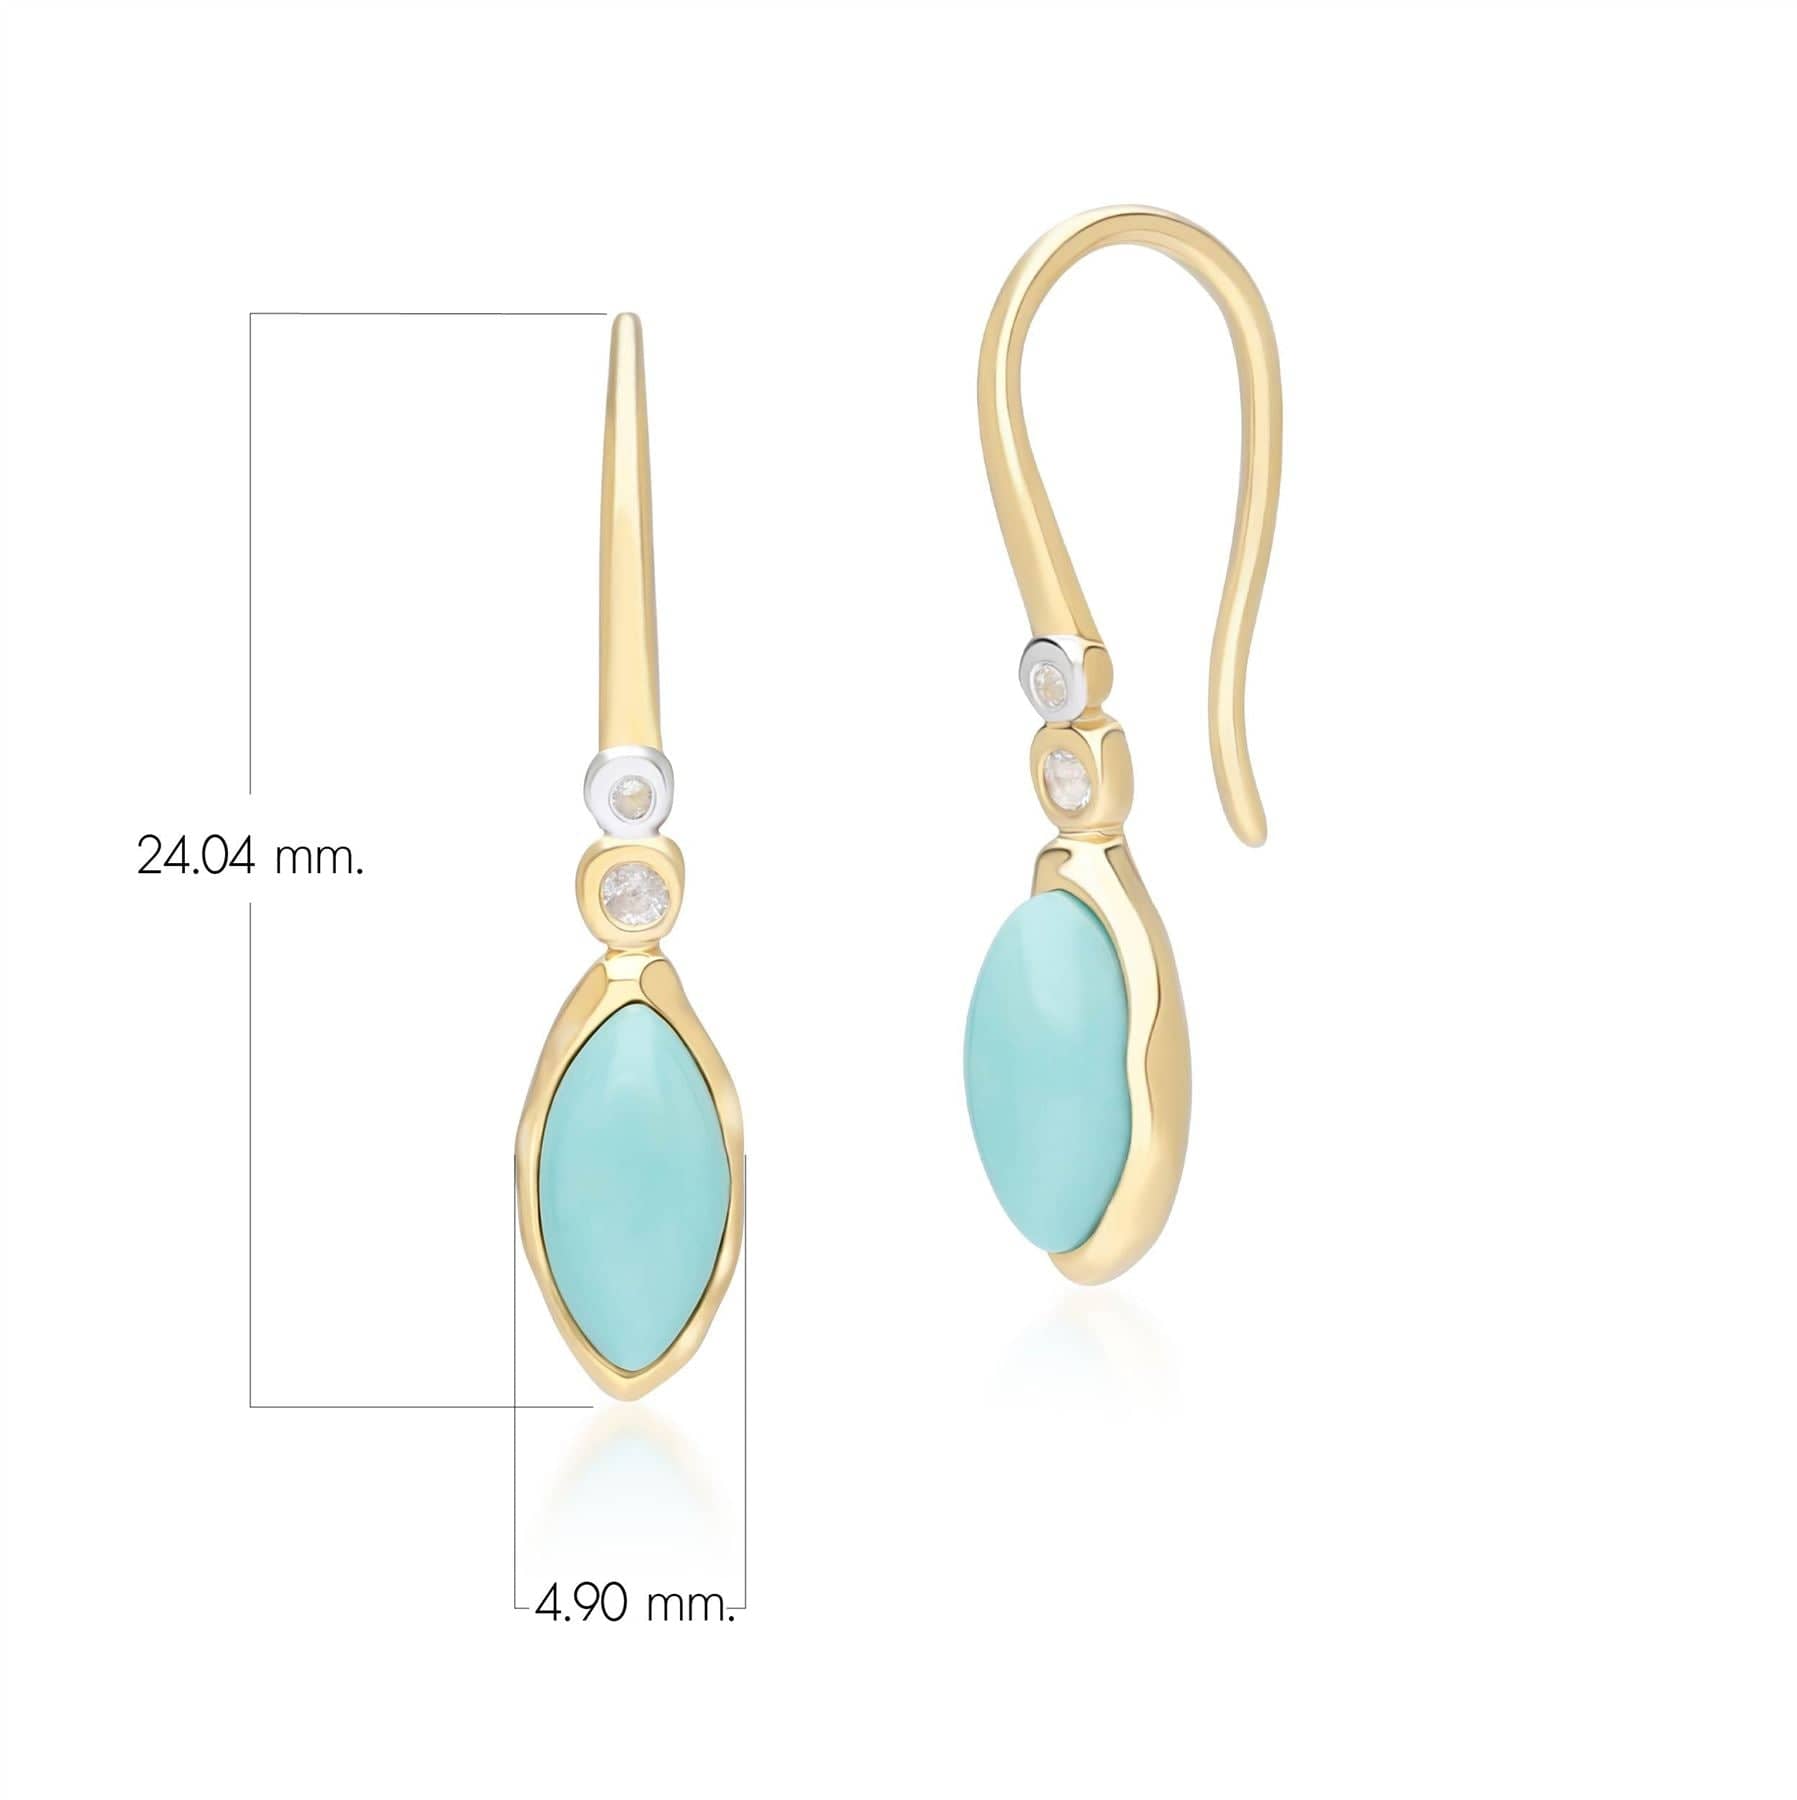 Irregular Marquise Turquoise & Topaz  Drop Earrings In 18ct Gold Plated SterlIng Silver